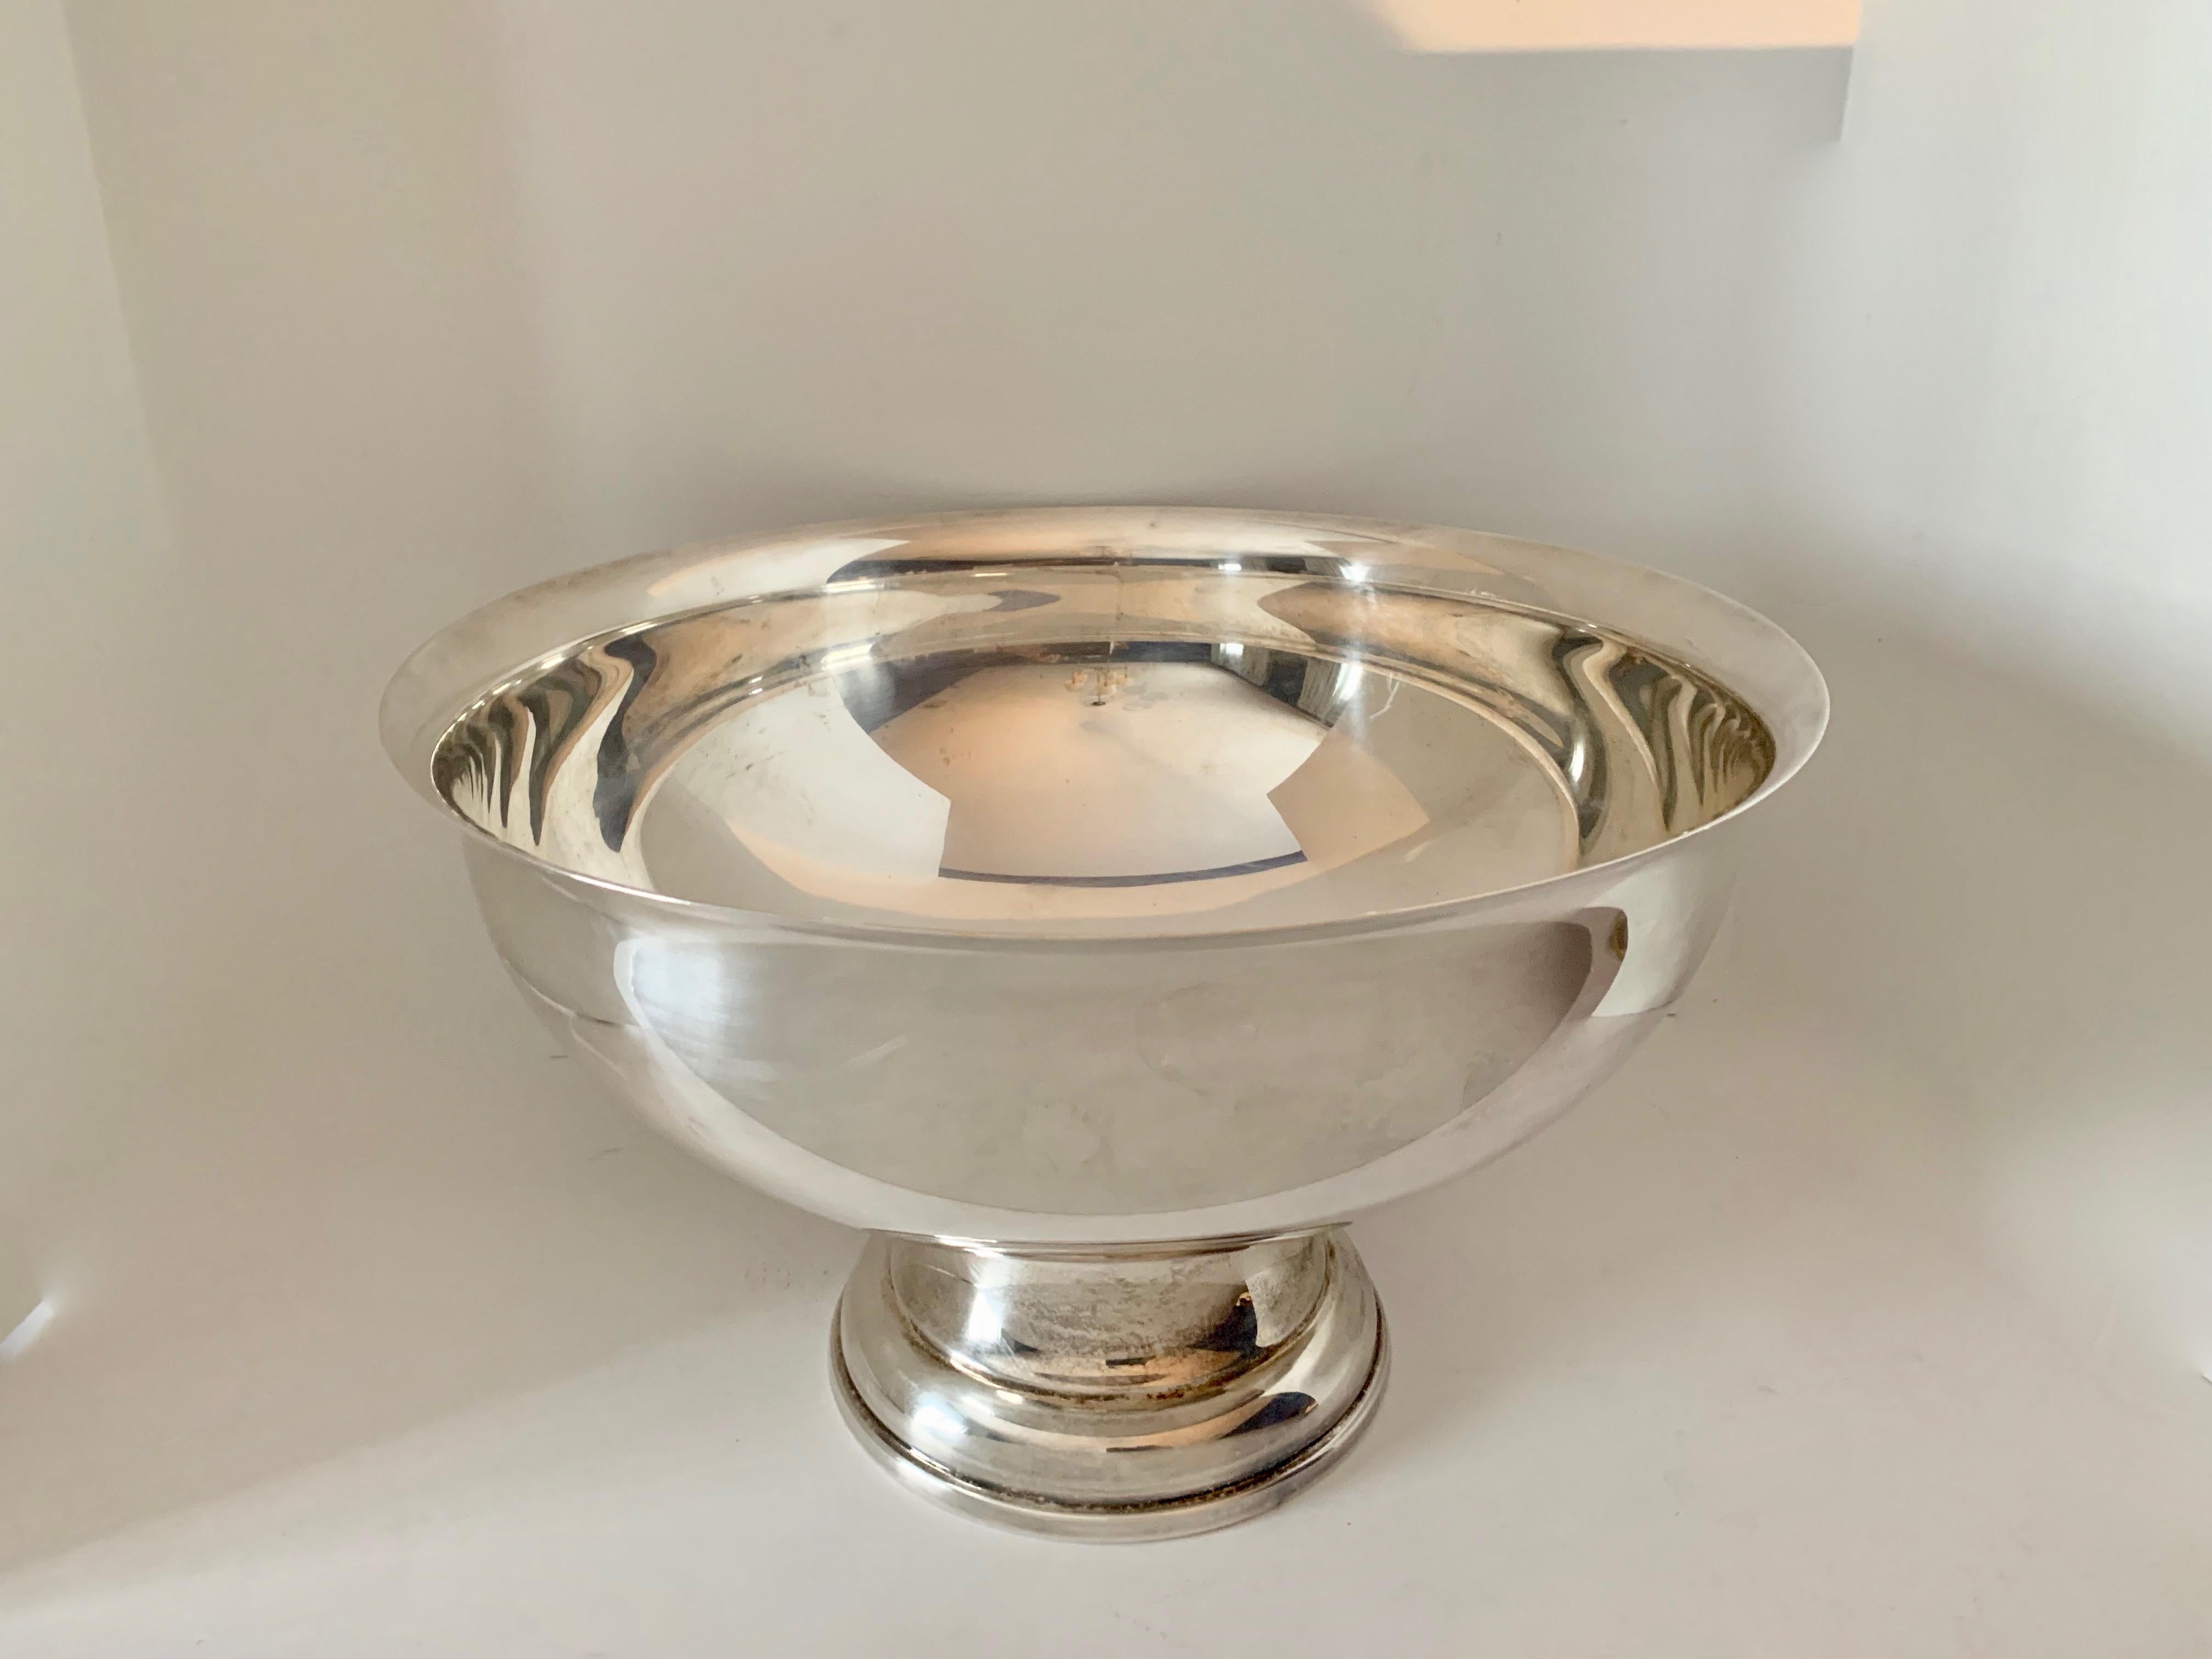 20th Century Large Silver Footed Bowl Centerpiece Punch Bowl